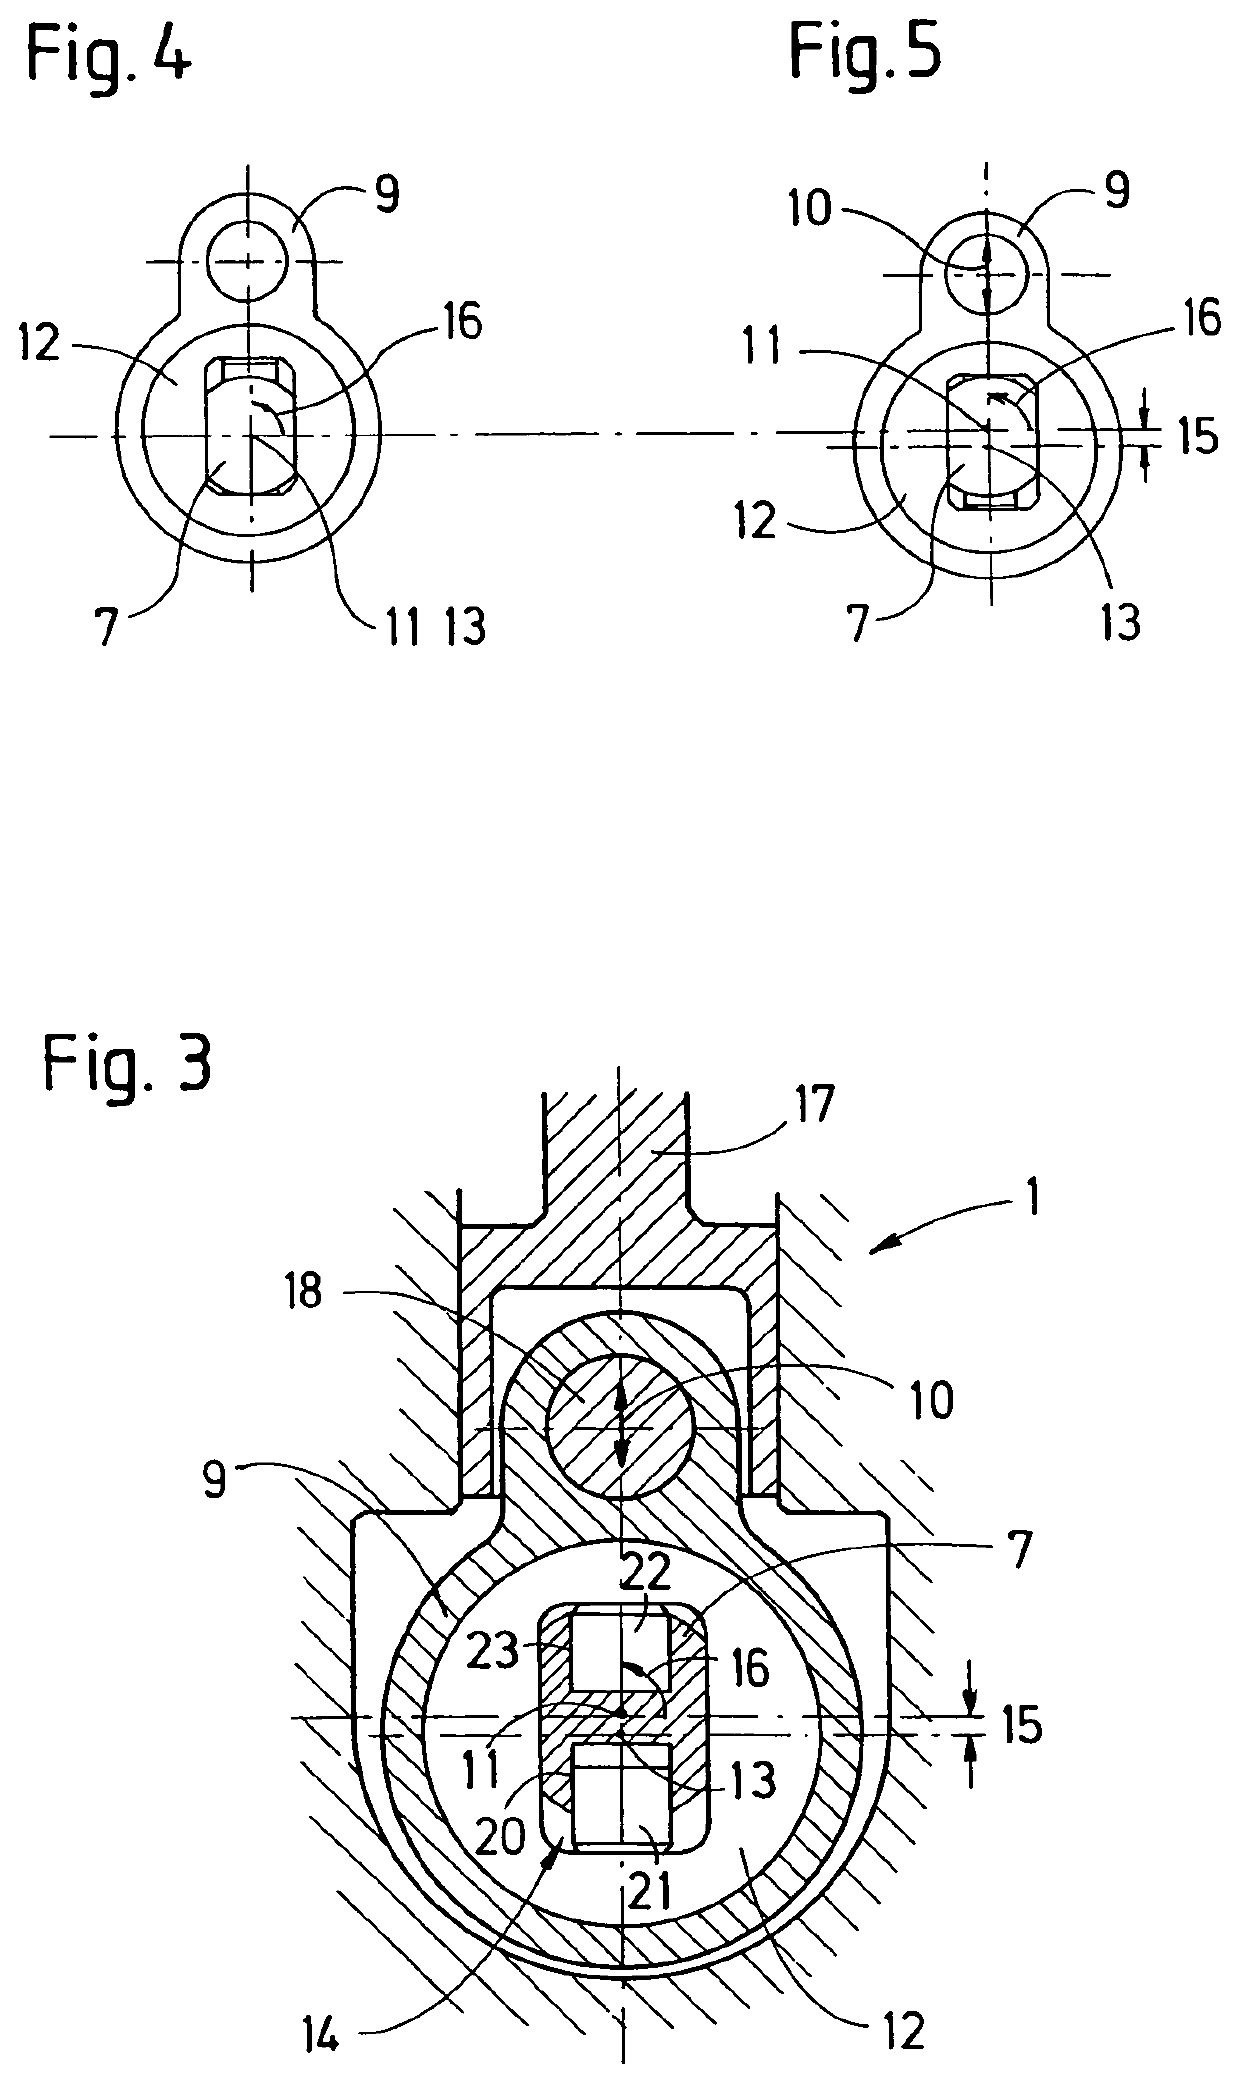 Tamping unit and method for tamping a track